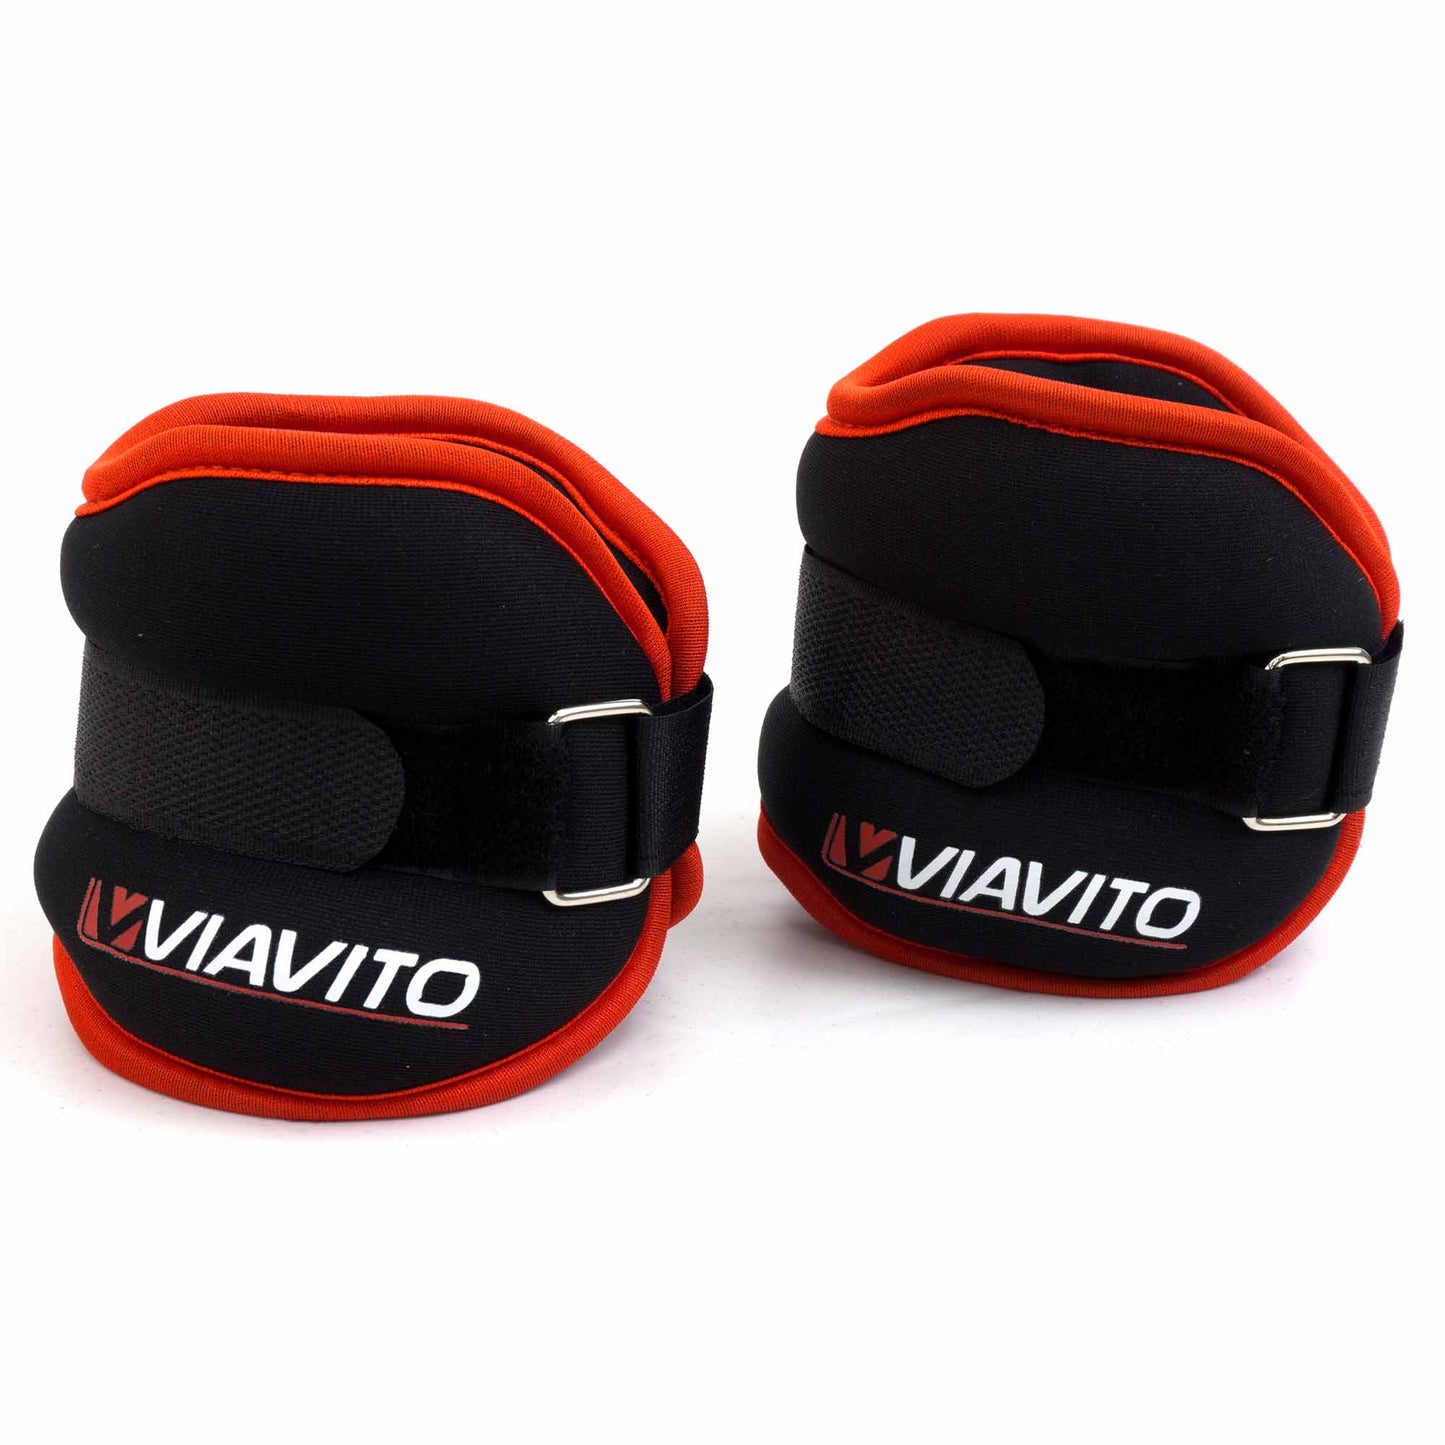 |Viavito 2 x 1kg Ankle Weights - Folded|